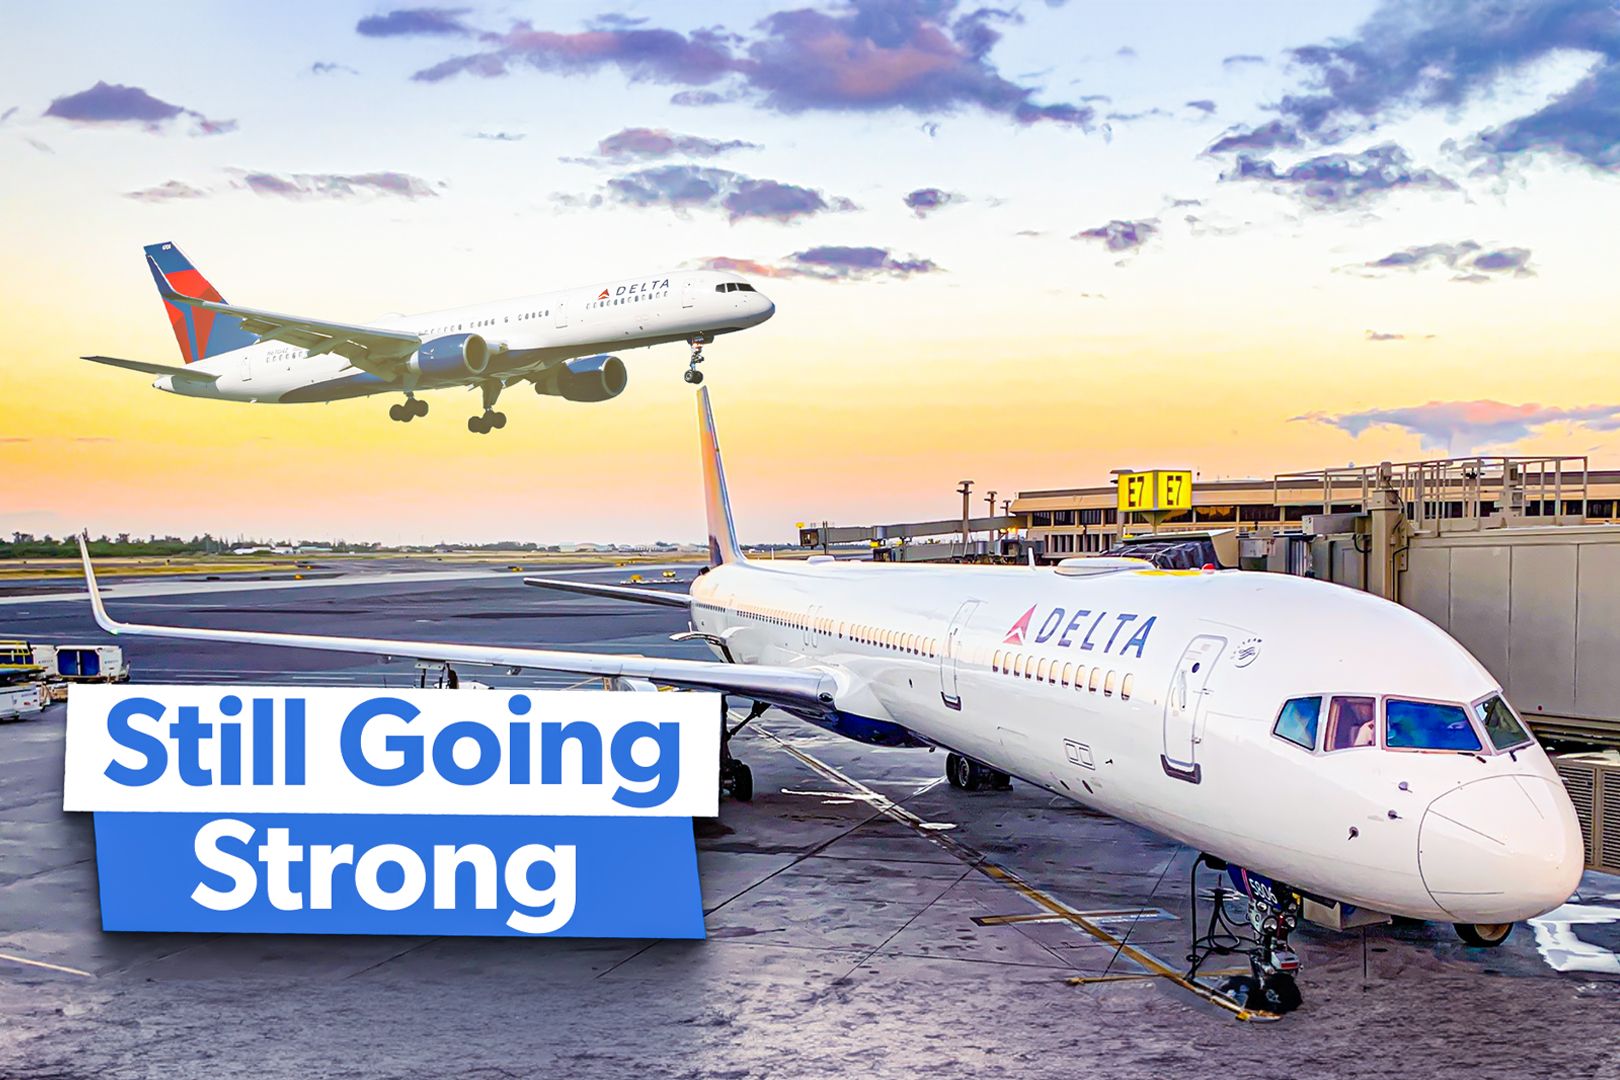 How long will Delta Air Lines operate the Boeing 757?